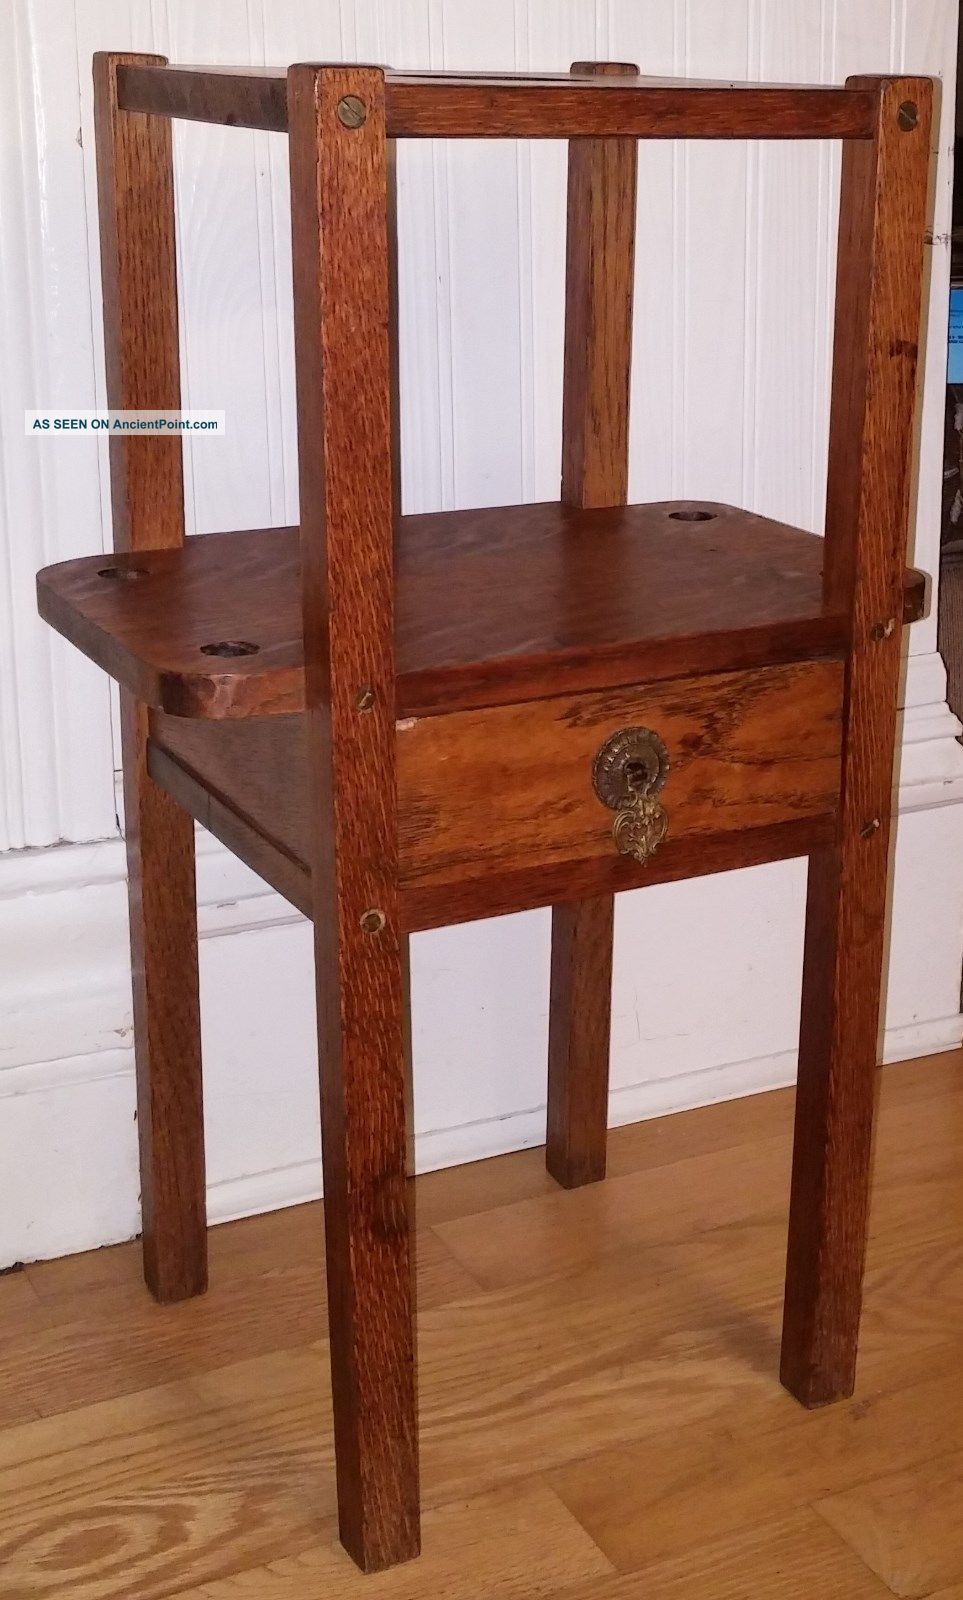 Antique Mission Arts & Crafts Quarter Sawn Oak Smoking Pipe Stand Cabinet 1900-1950 photo